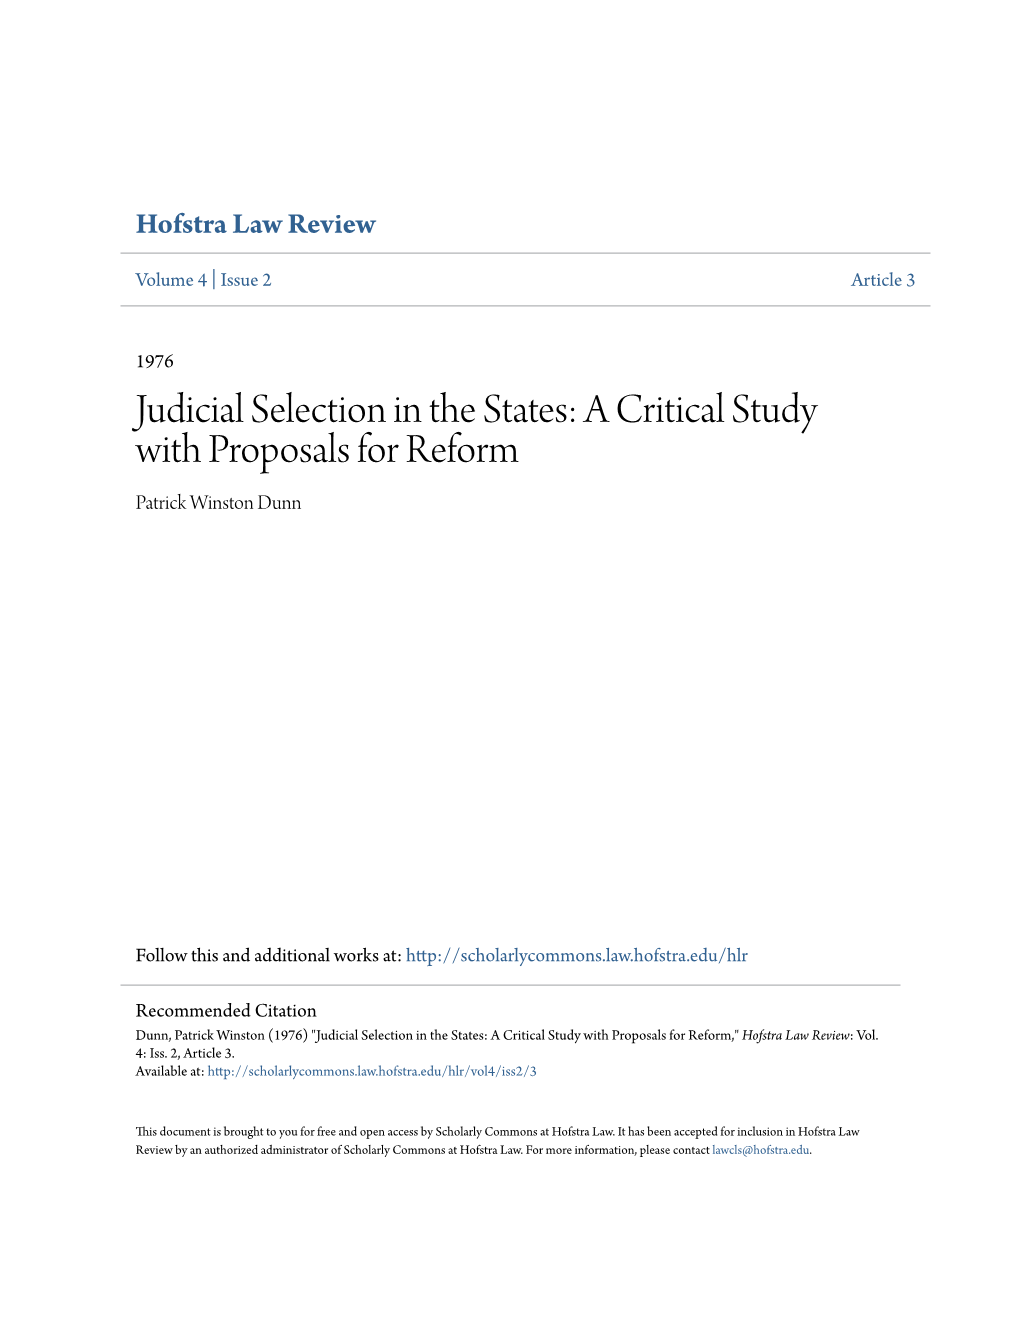 Judicial Selection in the States: a Critical Study with Proposals for Reform Patrick Winston Dunn